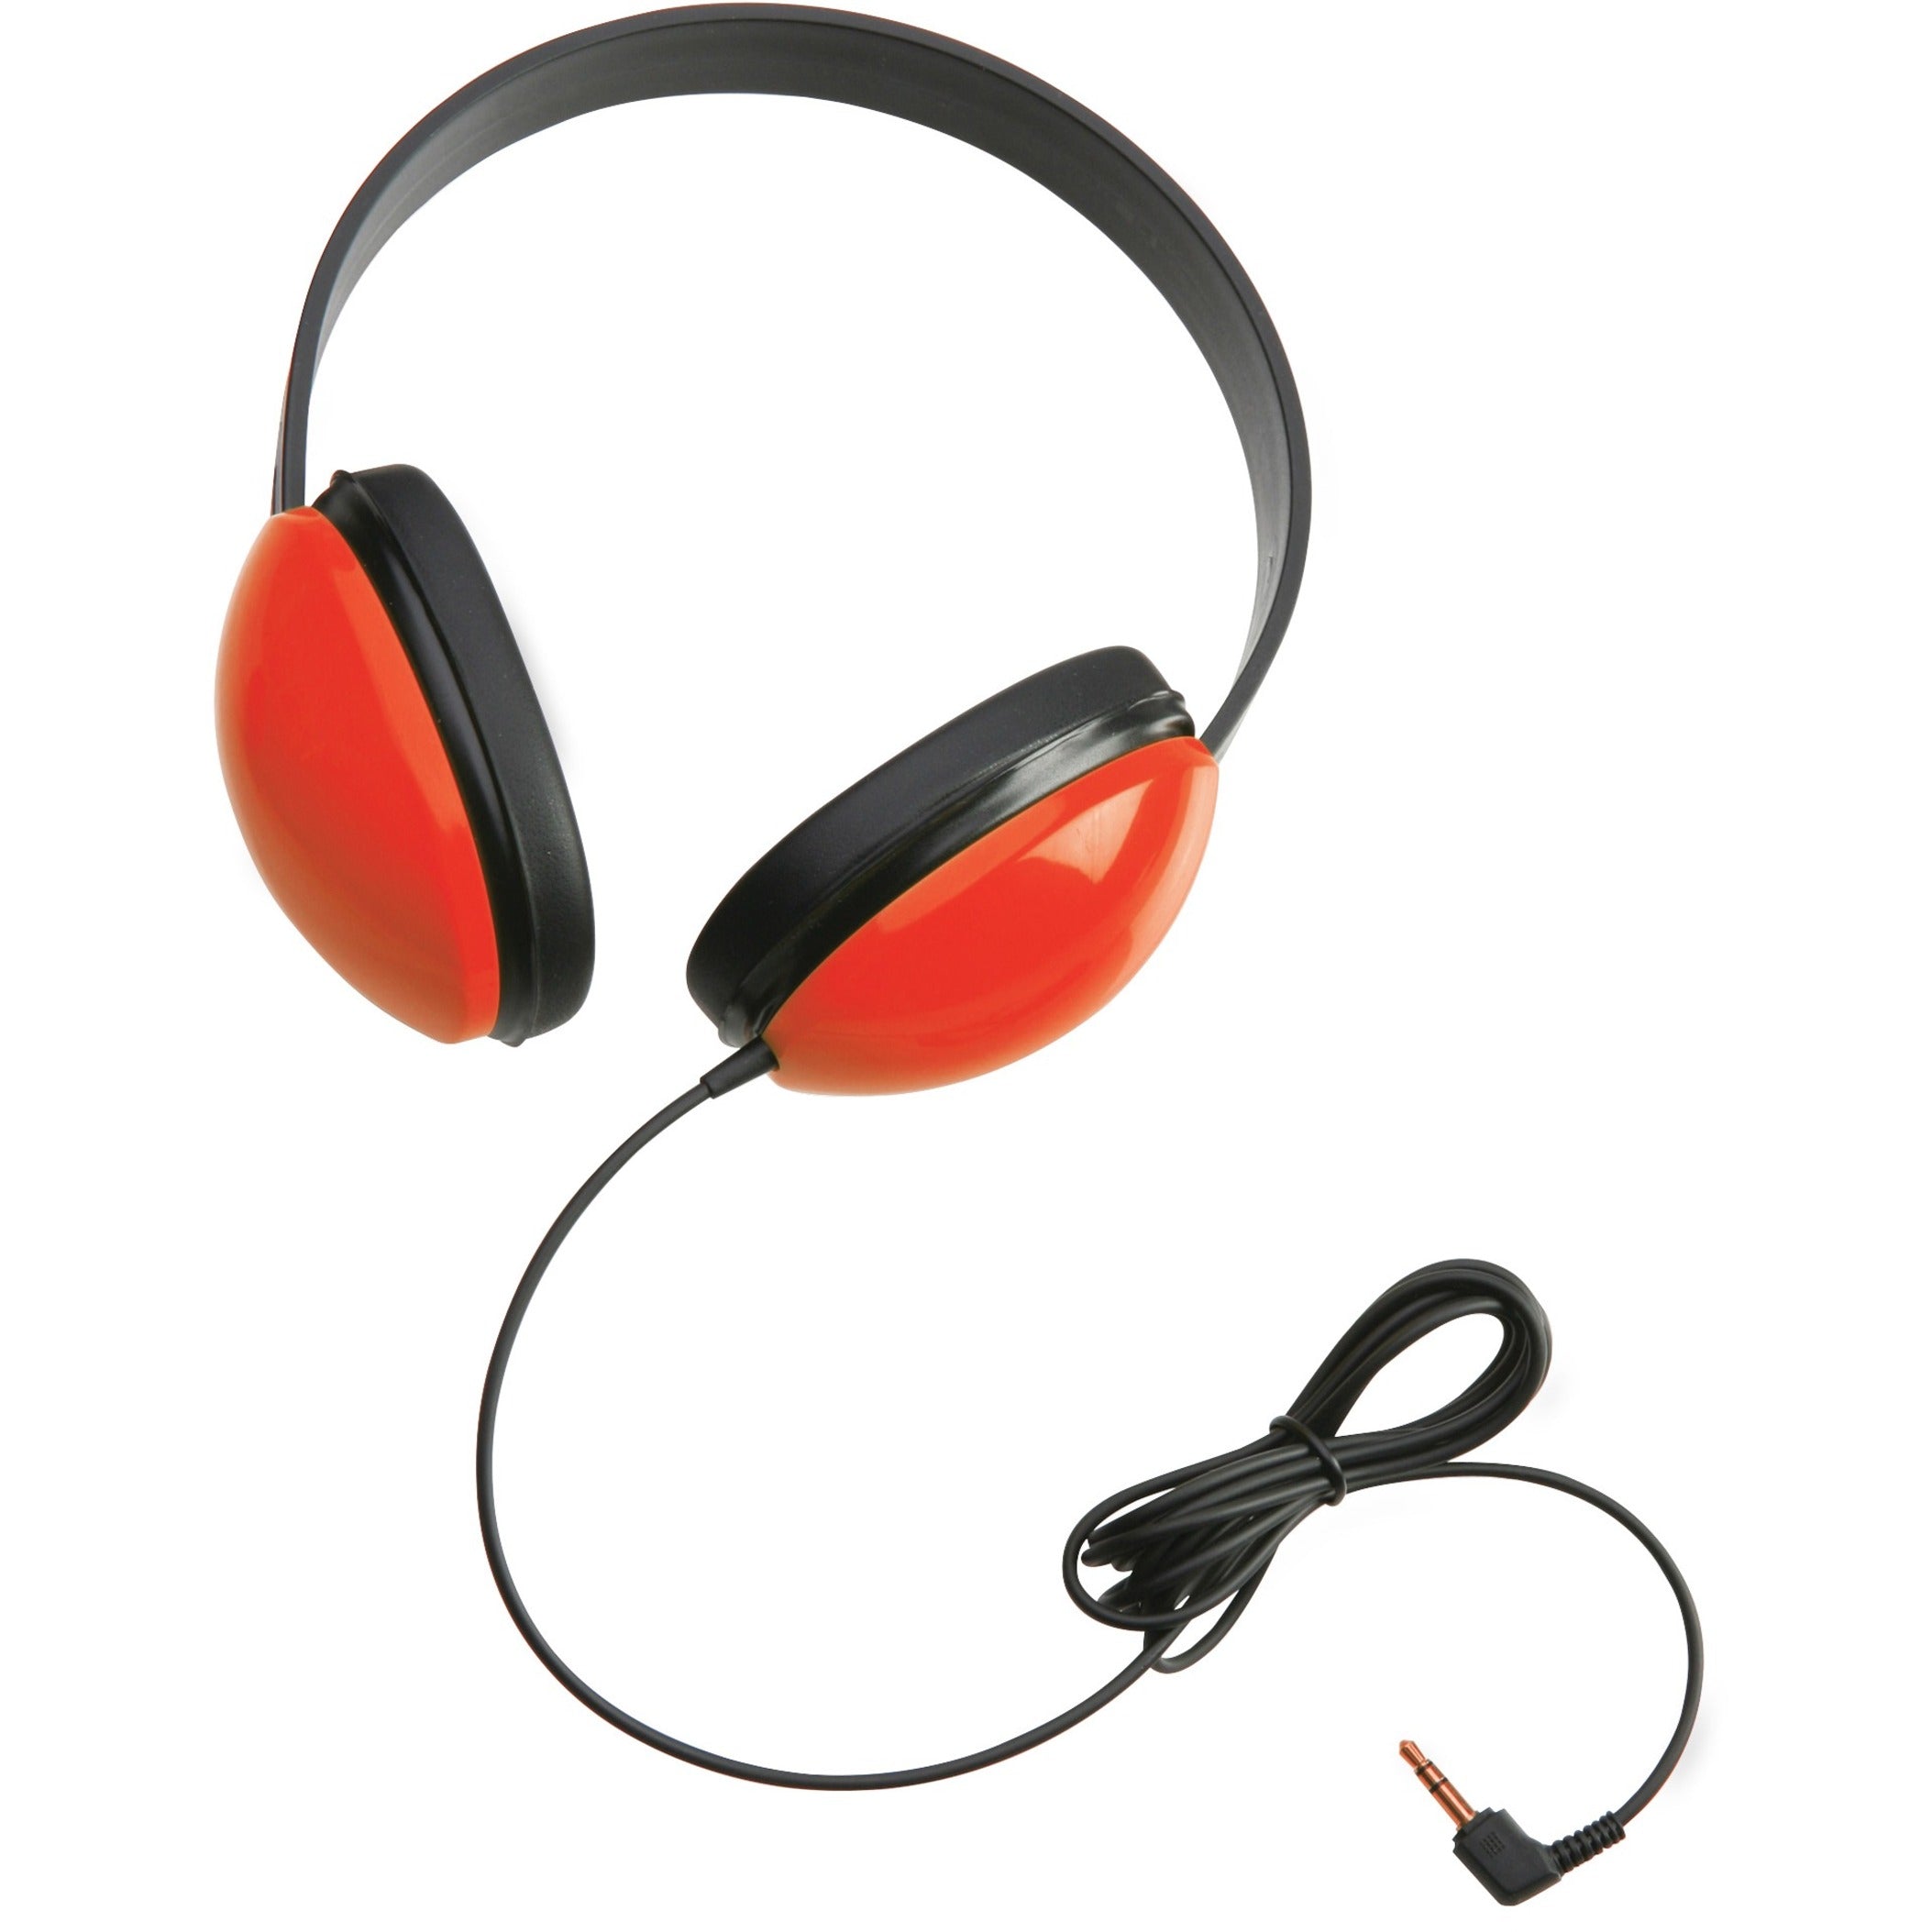 Califone 2800-RD Listening First Stereo Headphone, Over-the-head, Noise Reduction, Adjustable Headband